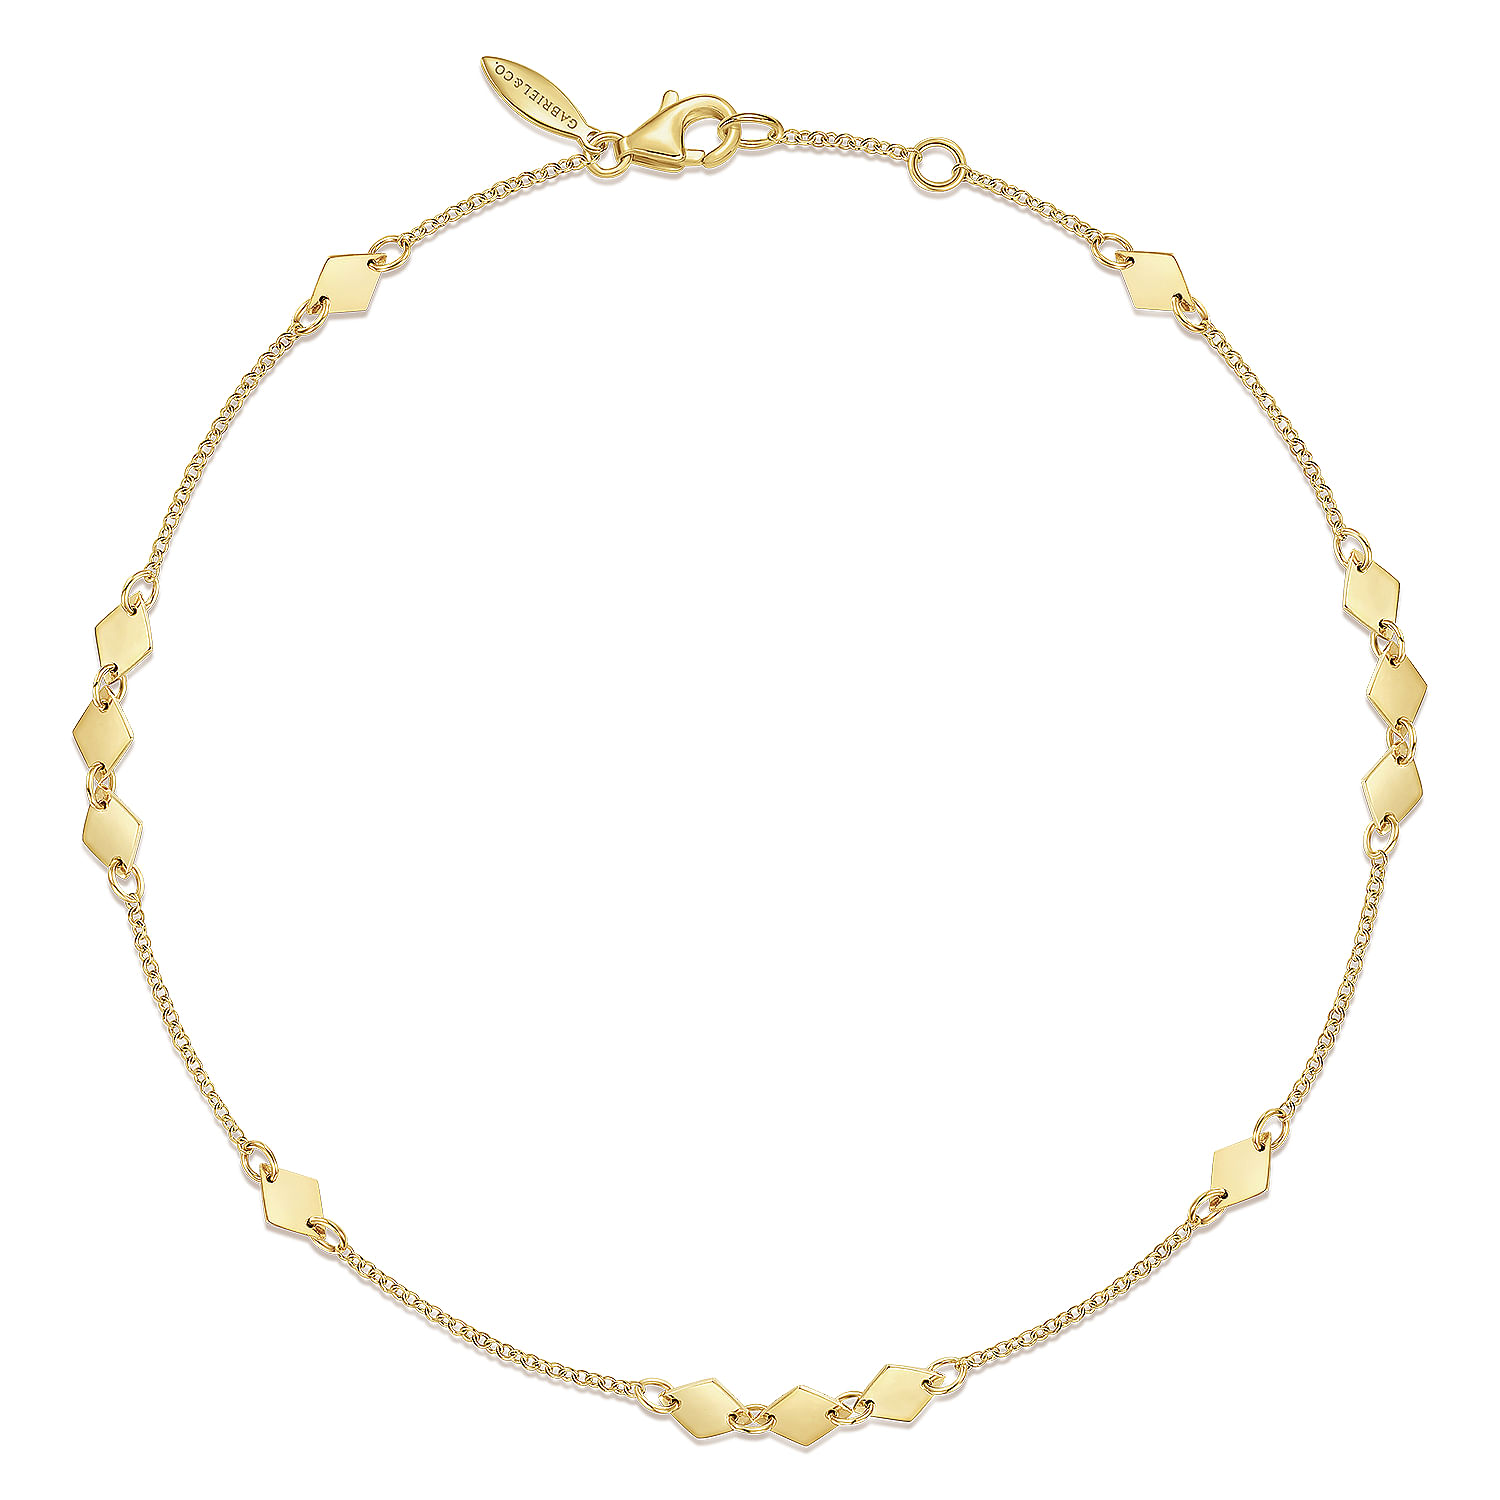 14K Yellow Gold and Sterling Silver Anklet with Rounded Diamond Shape Stations